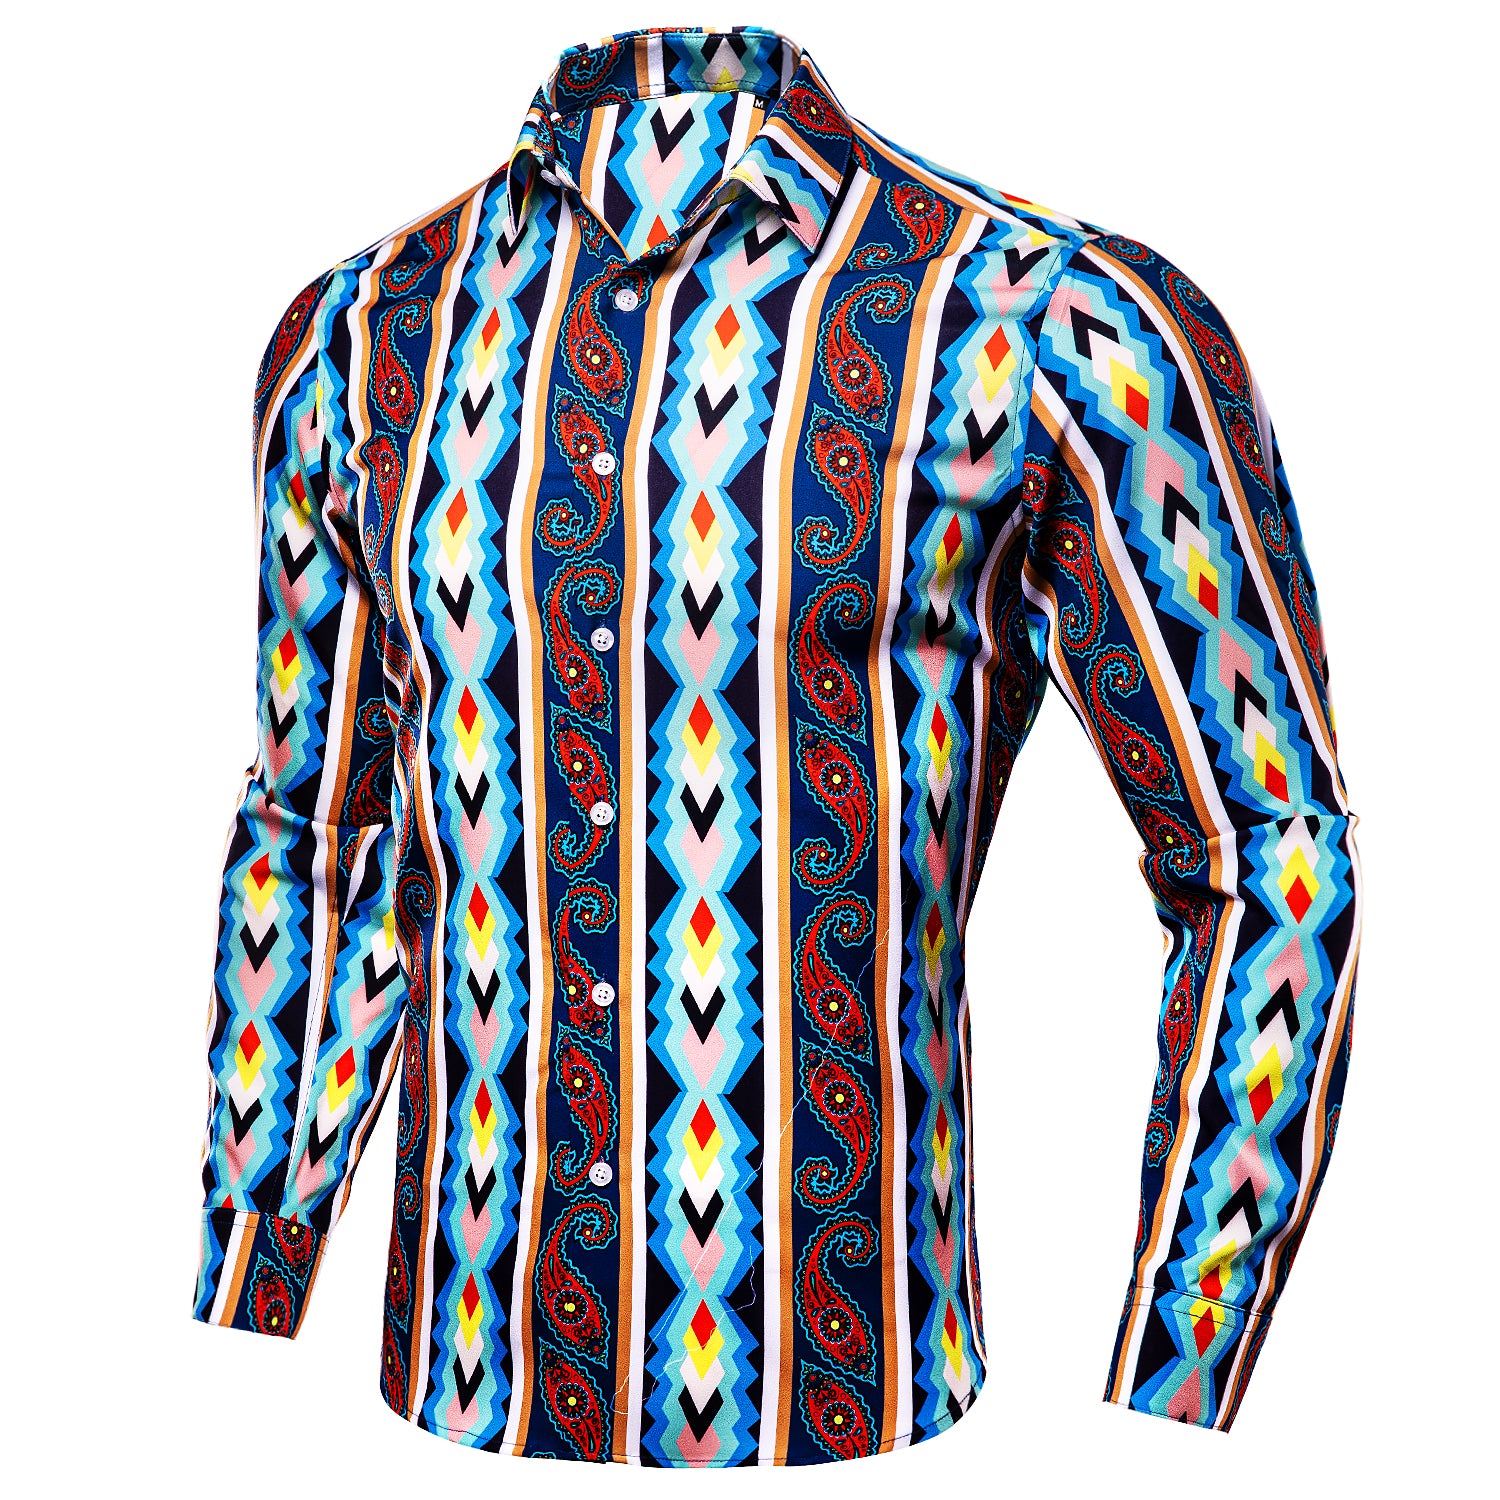 Clearance Sale New Colorful Striped Print Novelty Men's Shirt